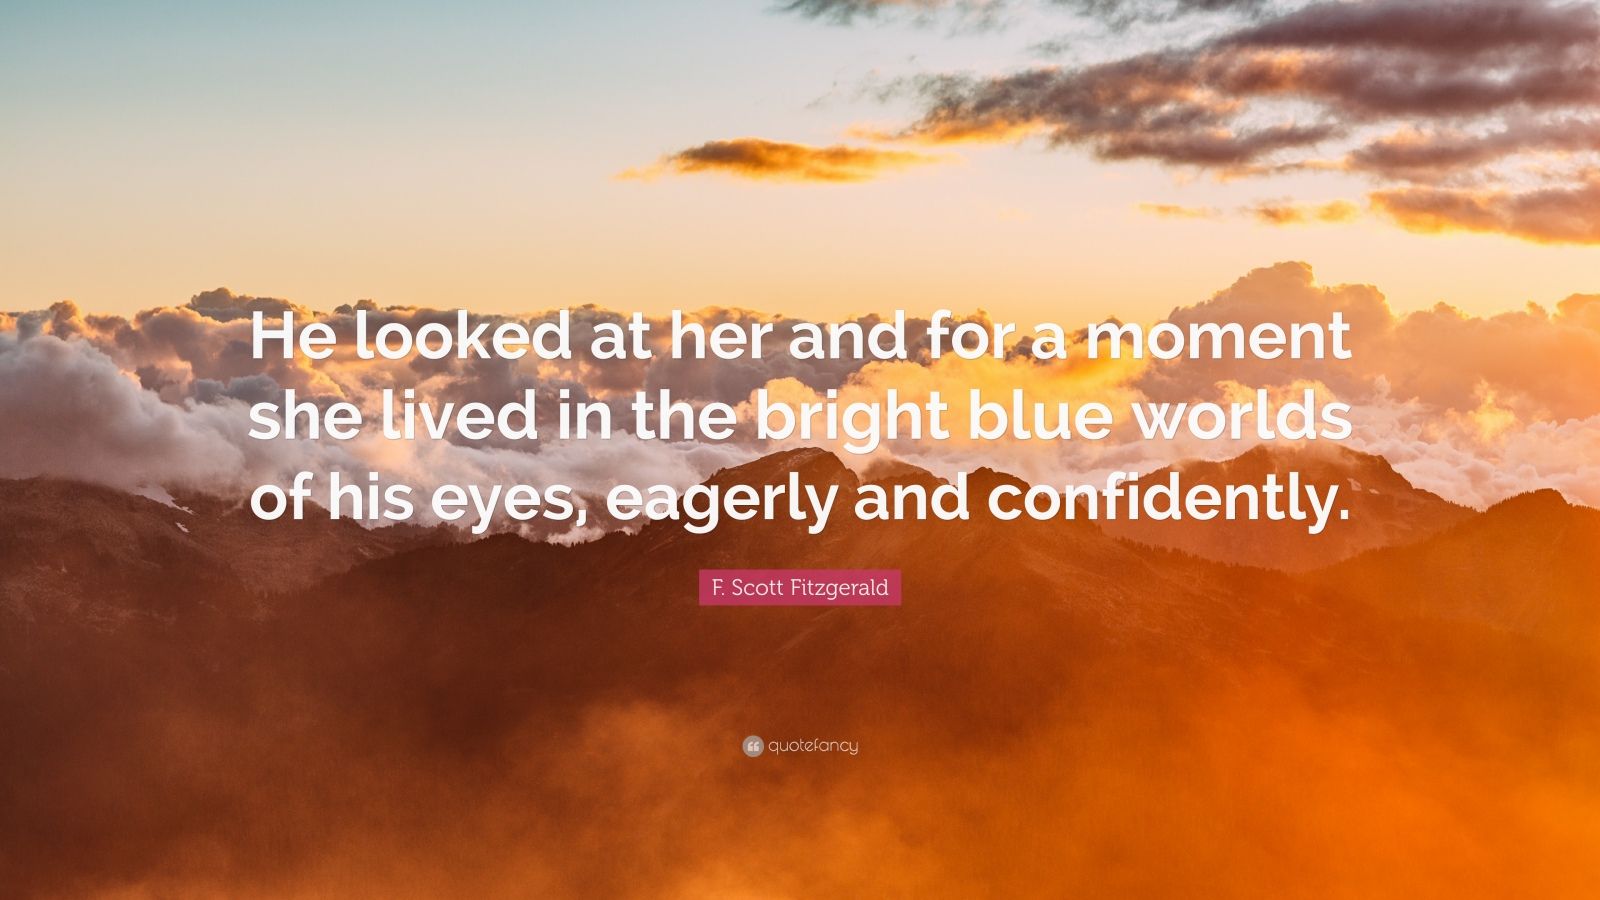 F. Scott Fitzgerald Quote: “He looked at her and for a moment she lived ...